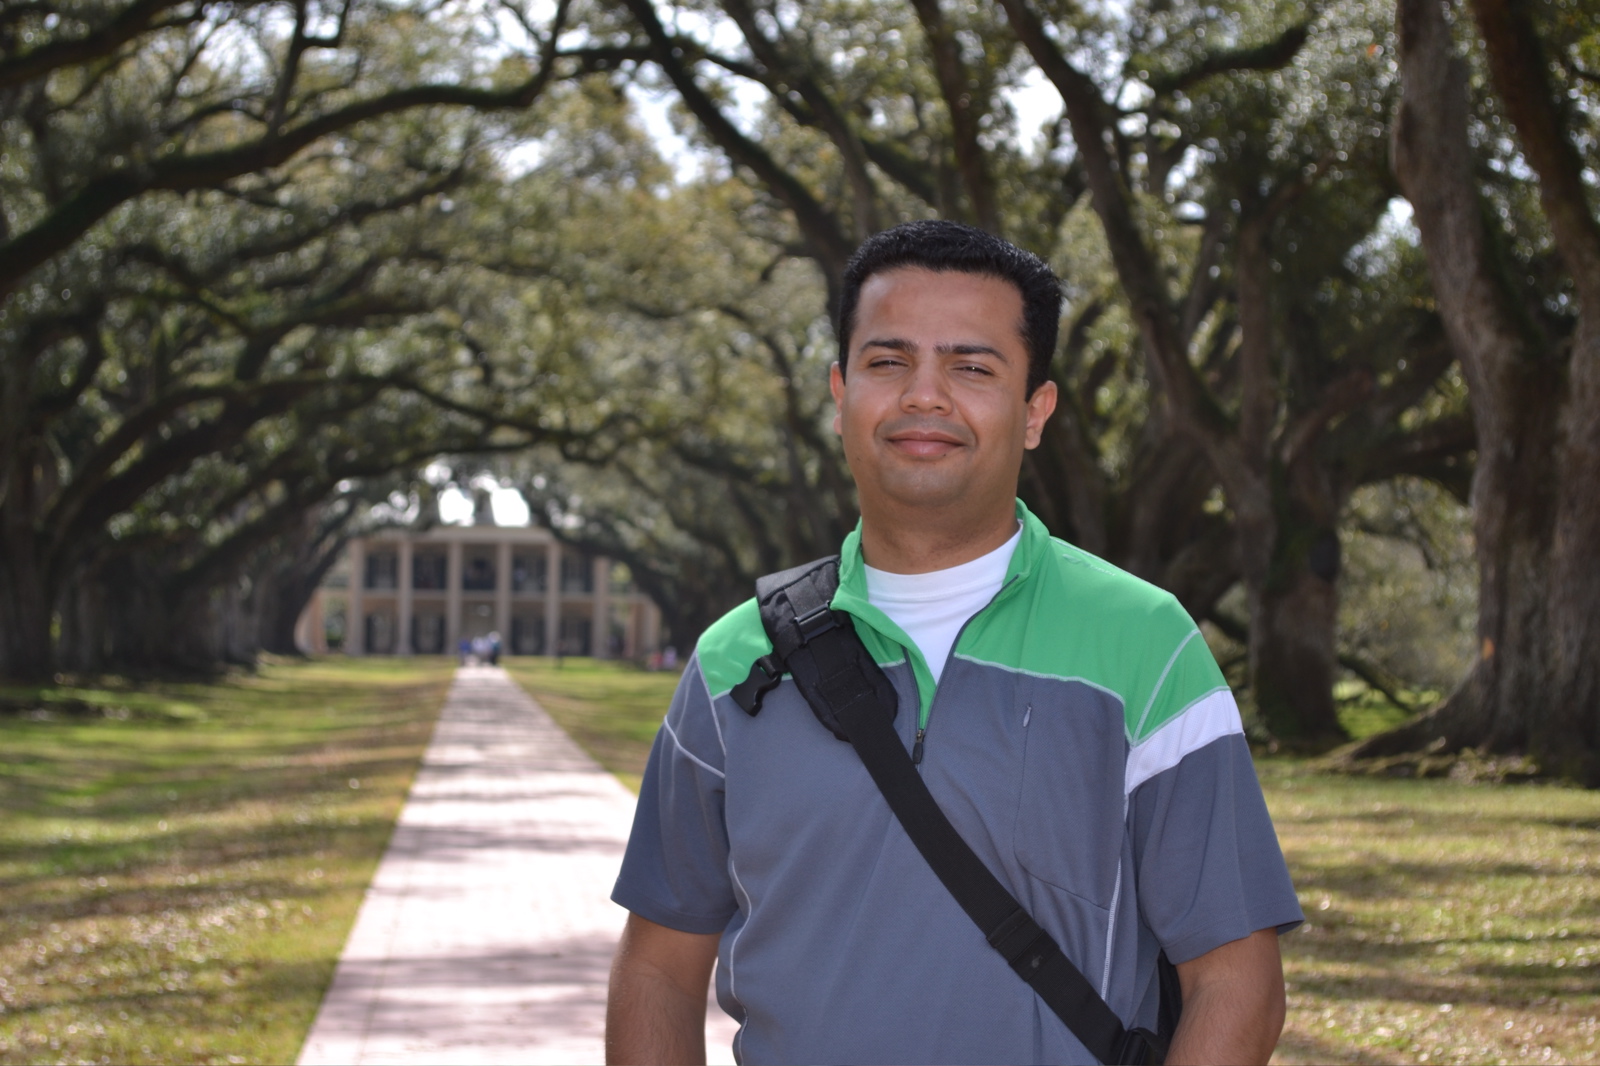 The obligatory gratuitous "Been There Done That" shot with the Oak Alley Plantation.